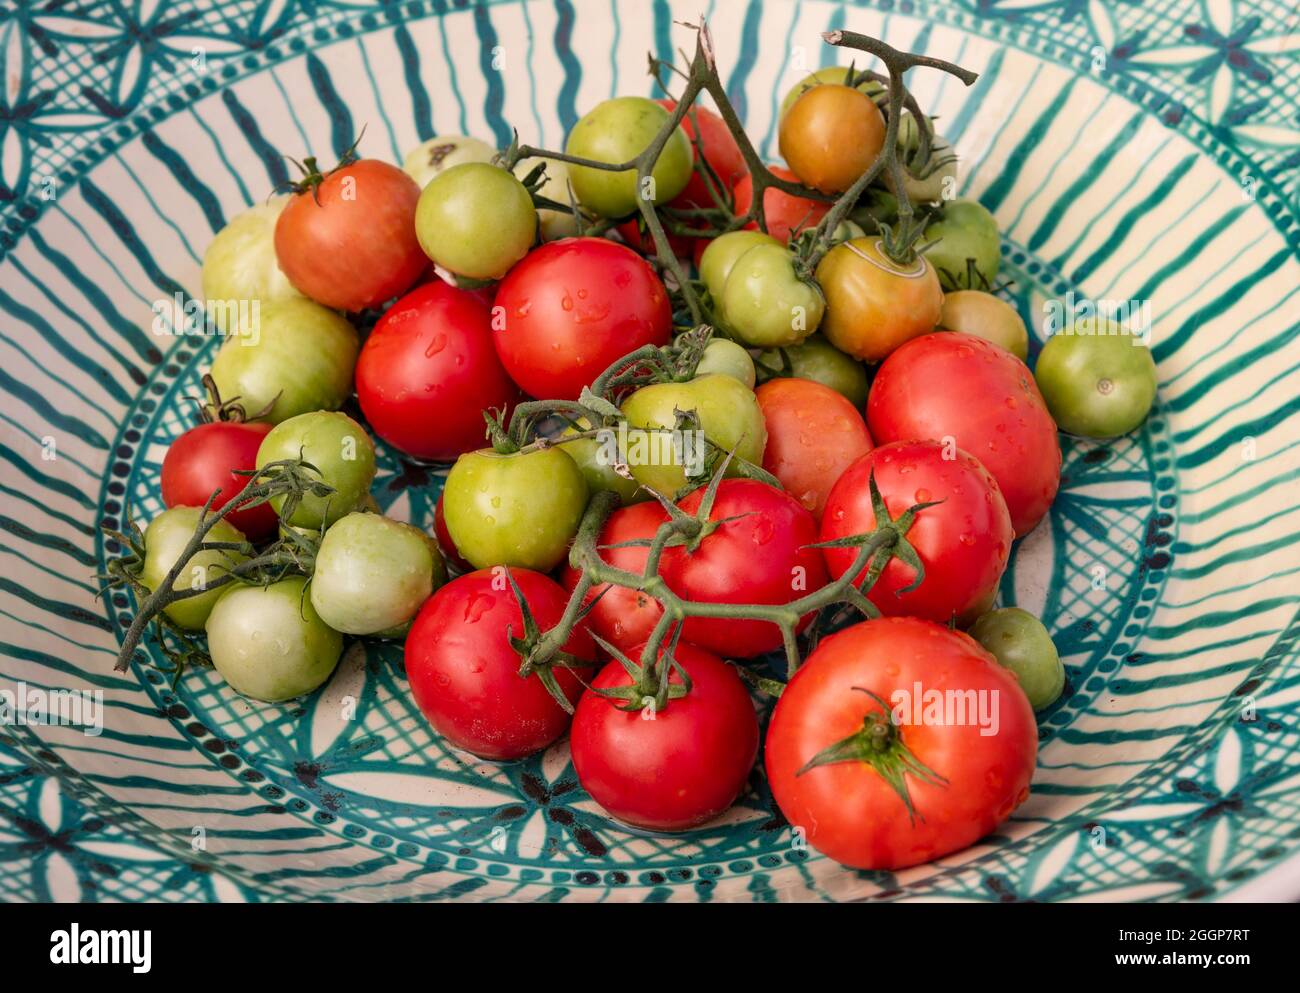 Fresh crop of green and red organic tomatoes on the vine, on a vintage rusitic plate. Stock Photo